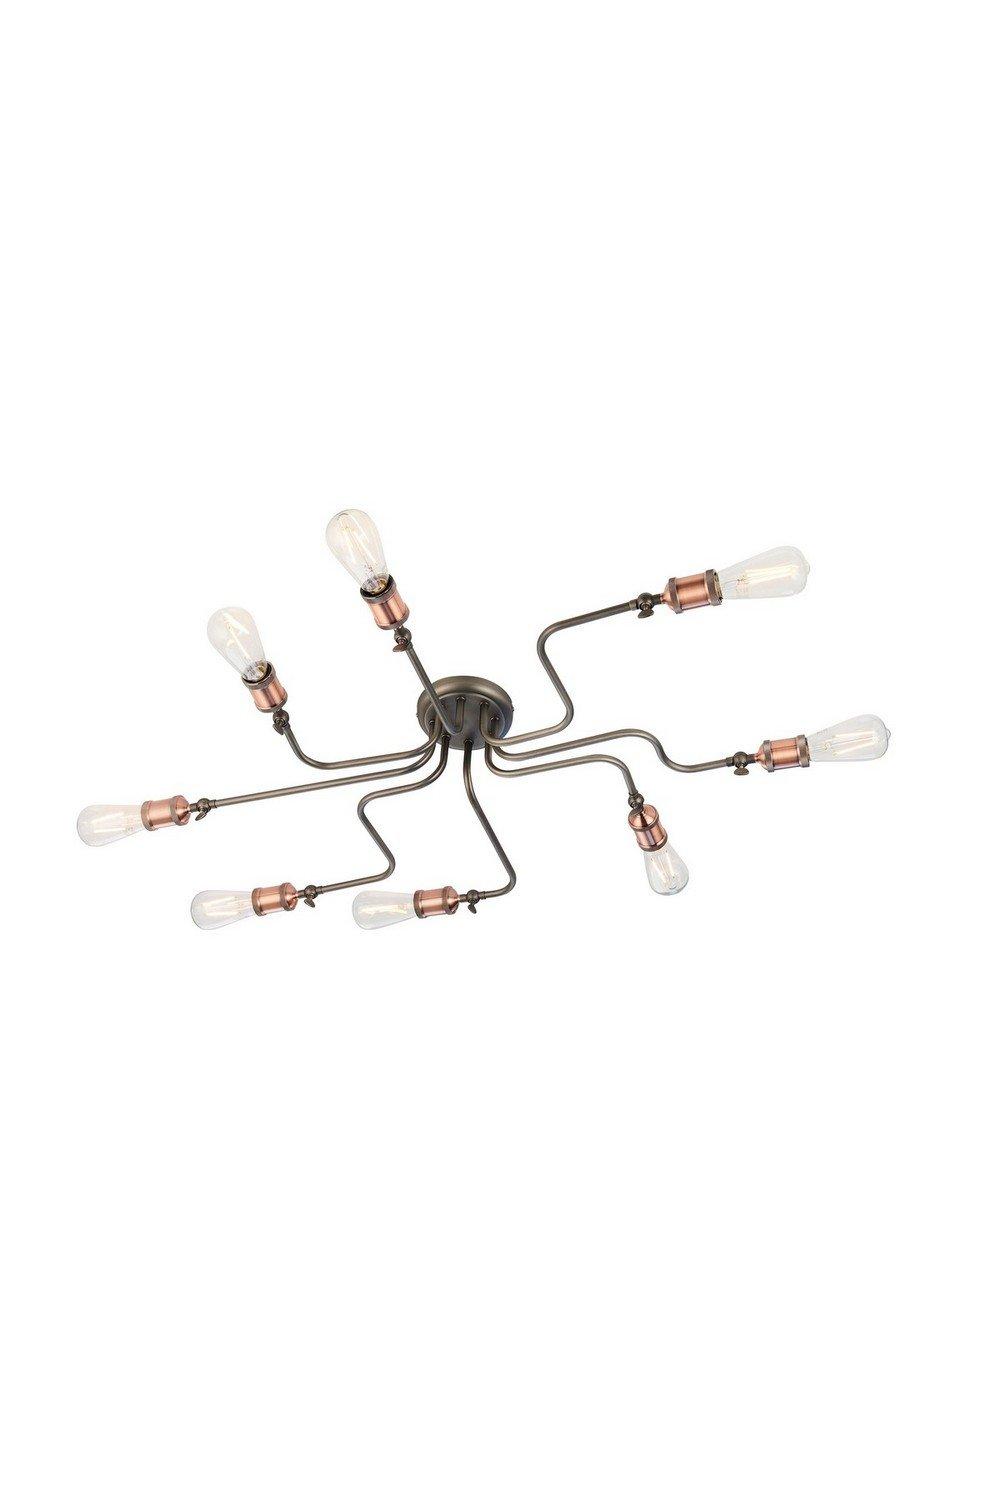 Hal Large Industrial Style Multi Arm Flush Light Aged Pewter & Copper with Adjustable Heads